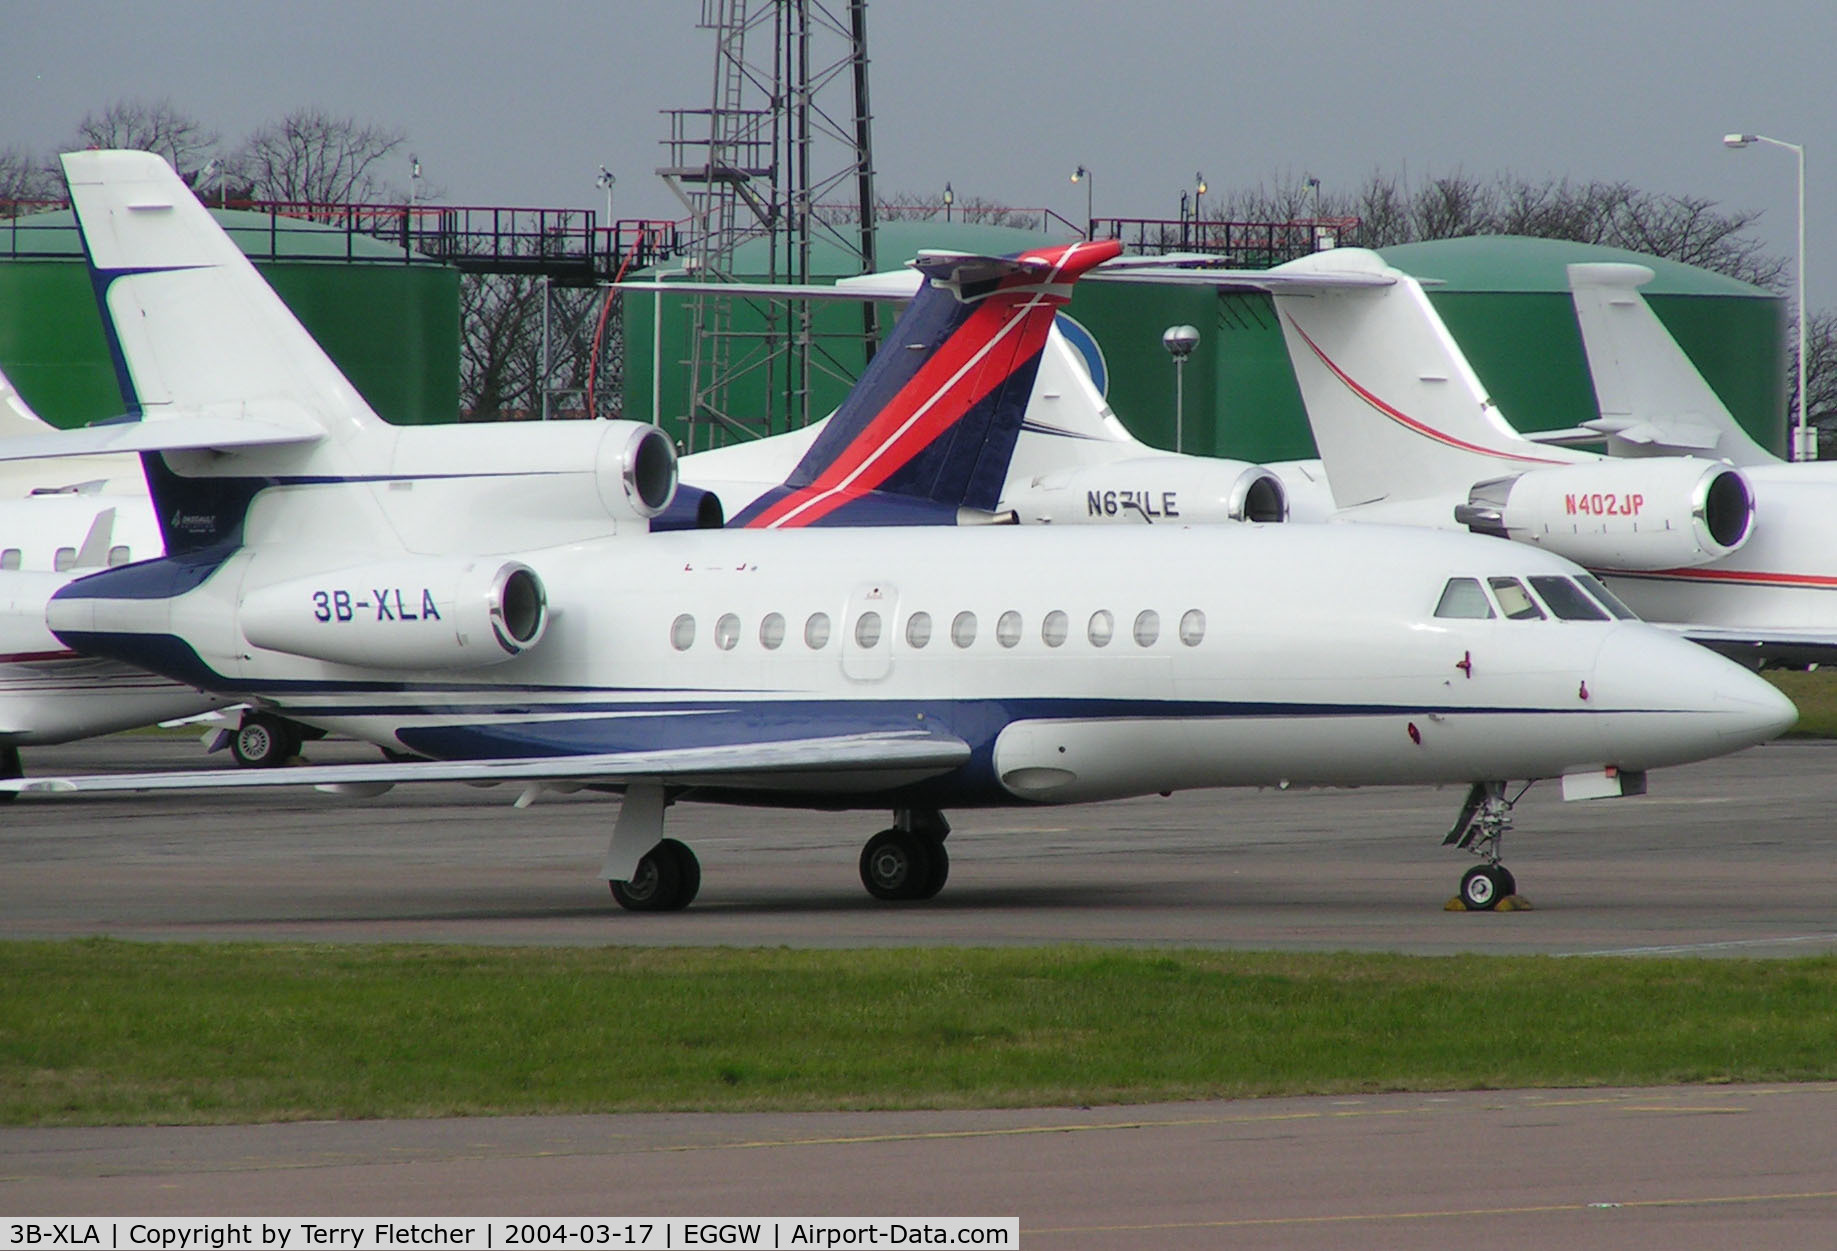 3B-XLA, 1985 Dassault Falcon 900 C/N 007, New Guinee registered bizjet at Luton in 2004 - subsequently re-registered as F-GMOH